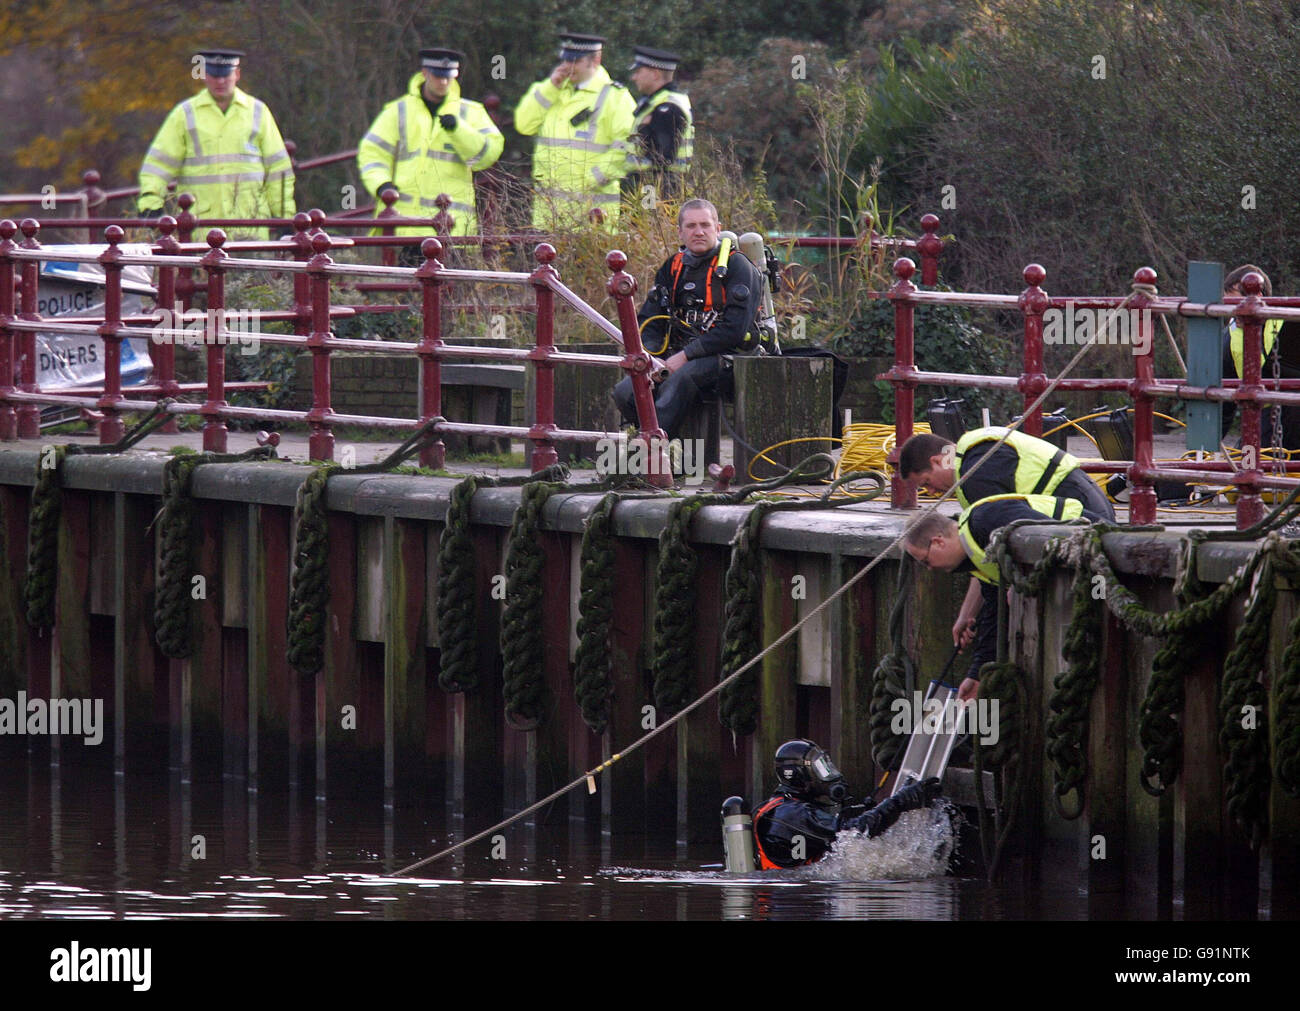 Police divers search the River Tees at Yarm, between Darlington and Middlesbrough, Thursday December 8, 2005, after a red Mazda suspected of having been stolen is thought to have careered into the water last night. Police say that initial indications from paint smears and tracks left at the scene are that the vehicle was driven down a flight of steps, through a barrier and into the river. See PA story POLICE River. PRESS ASSOCIATION Photo. Photo credit should read: Owen Humphreys / PA. Stock Photo